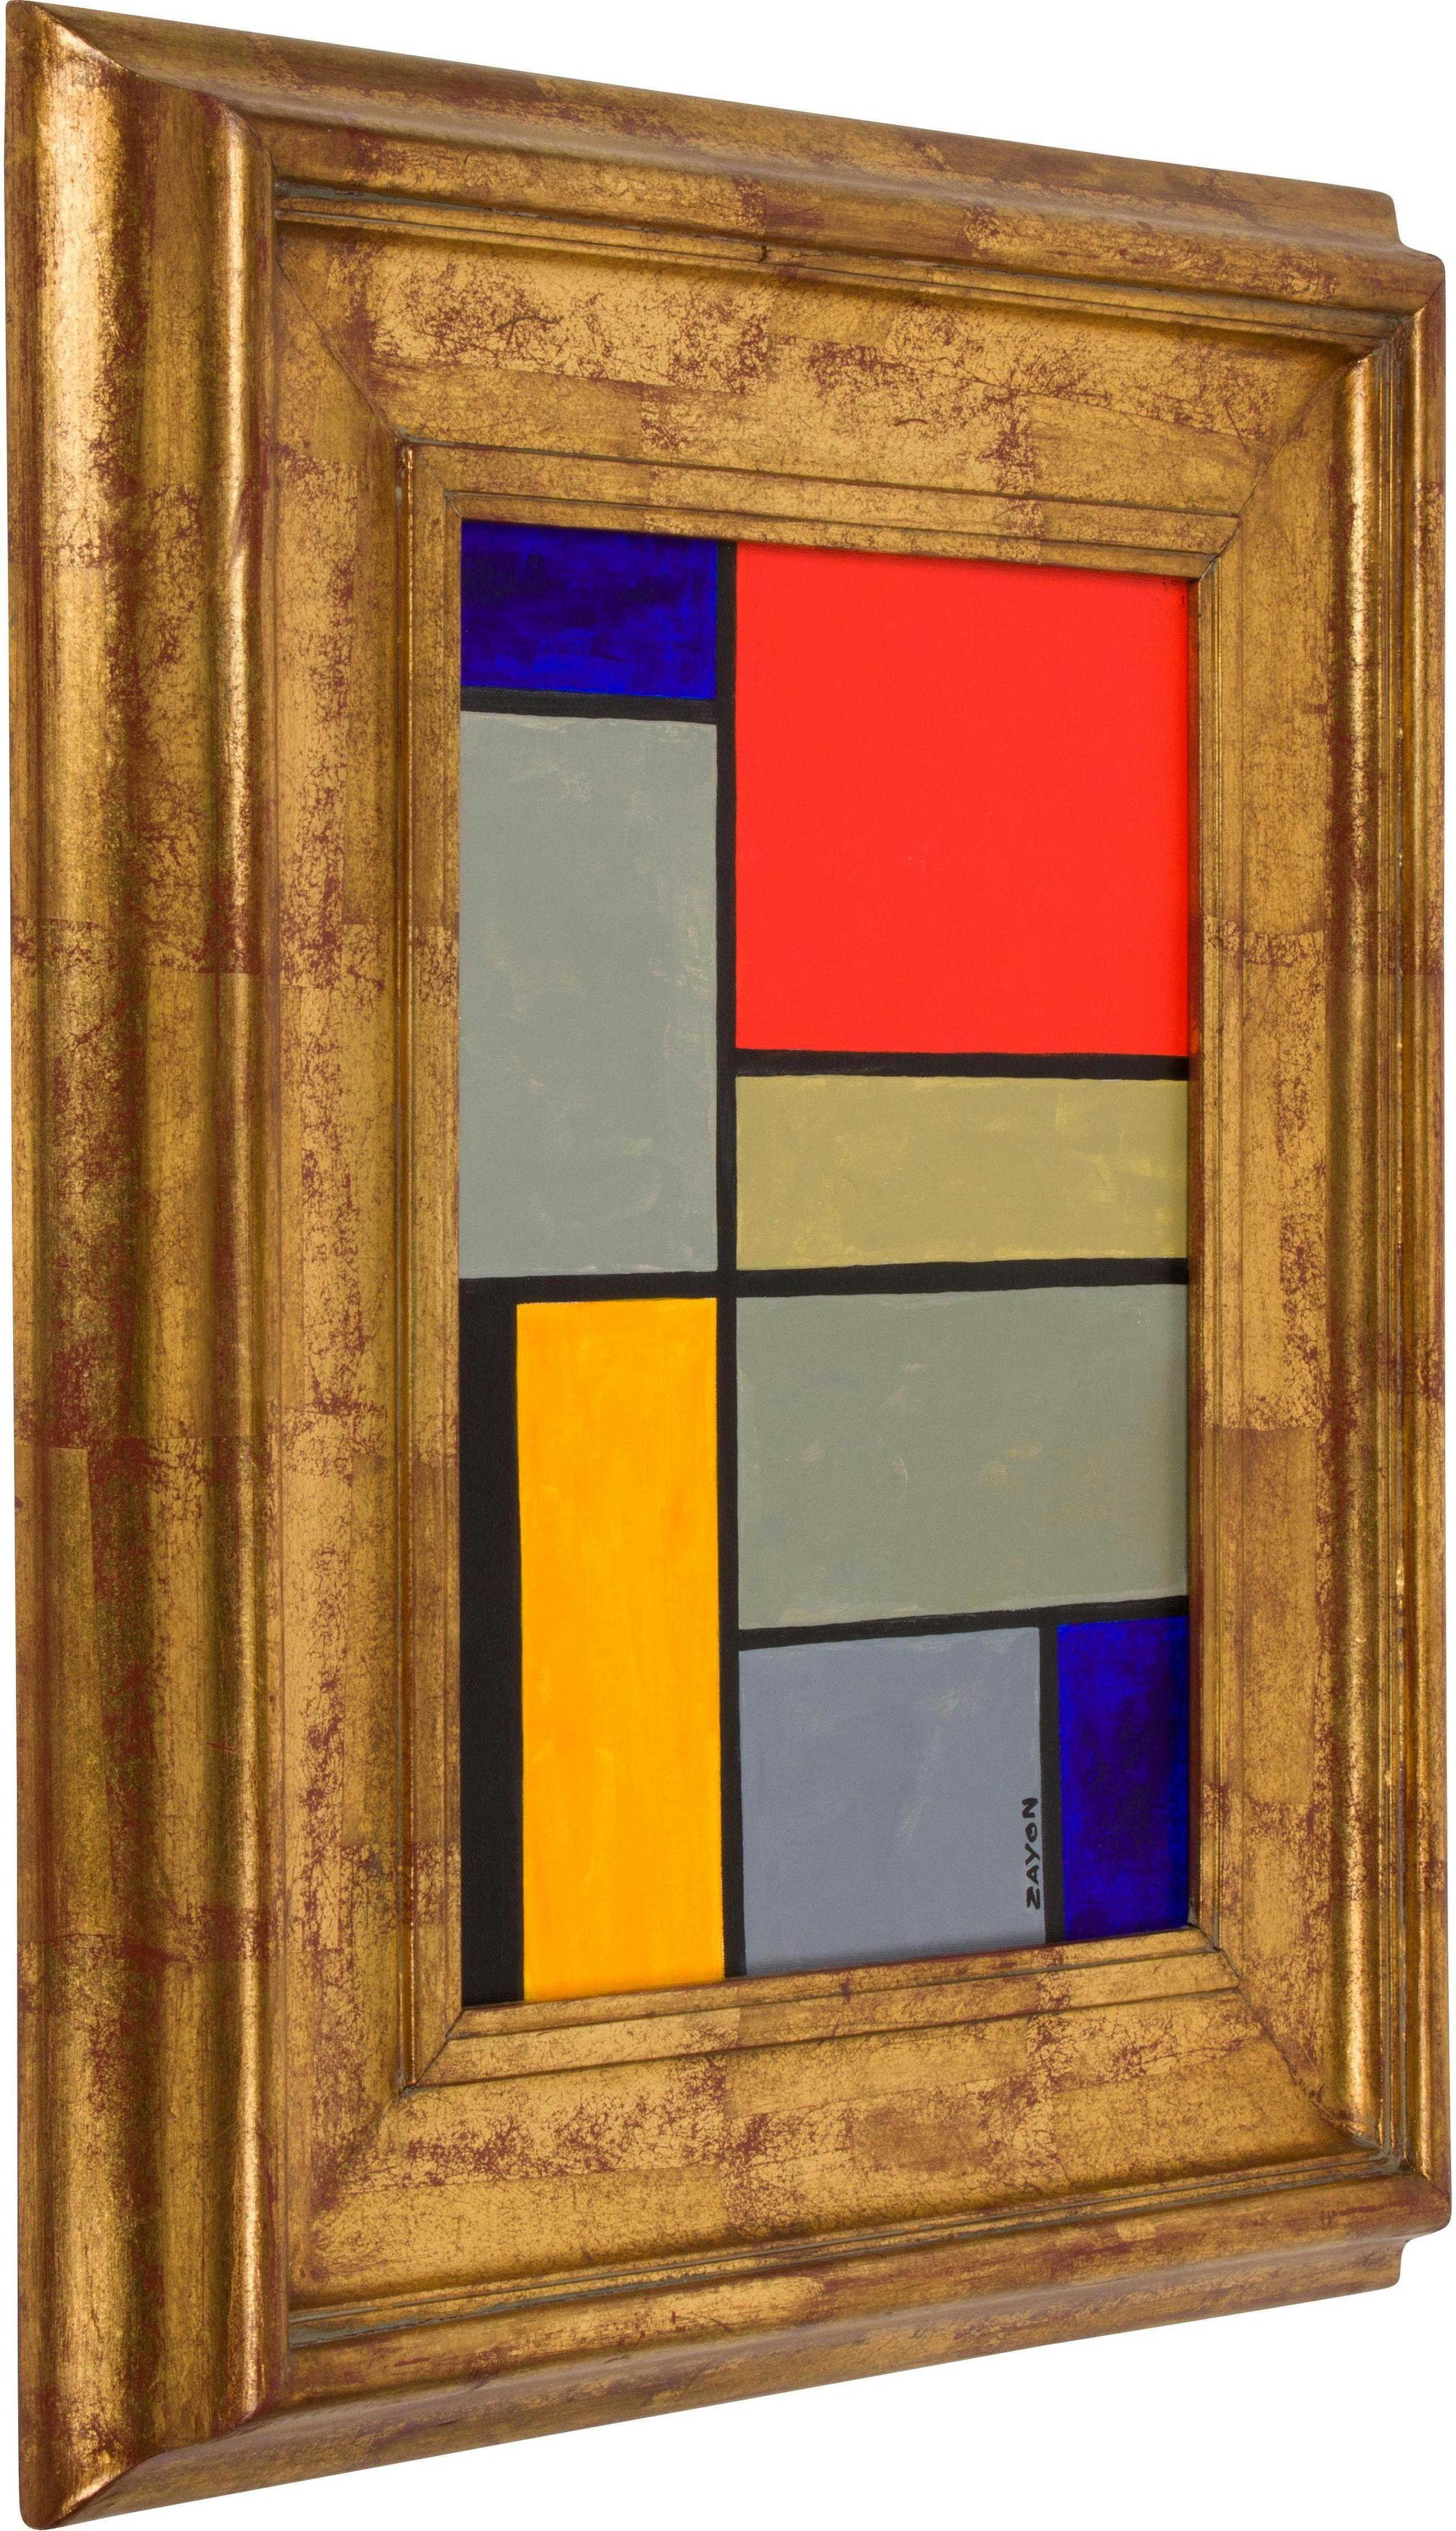 Colorful geometric abstract oil on board by well-listed artist Seymour Zayon.

Seymour Zayon, born in 1930, is a contemporary Philadelphia area painter known for his colorful geometric abstract compositions, mixed media and still life paintings.